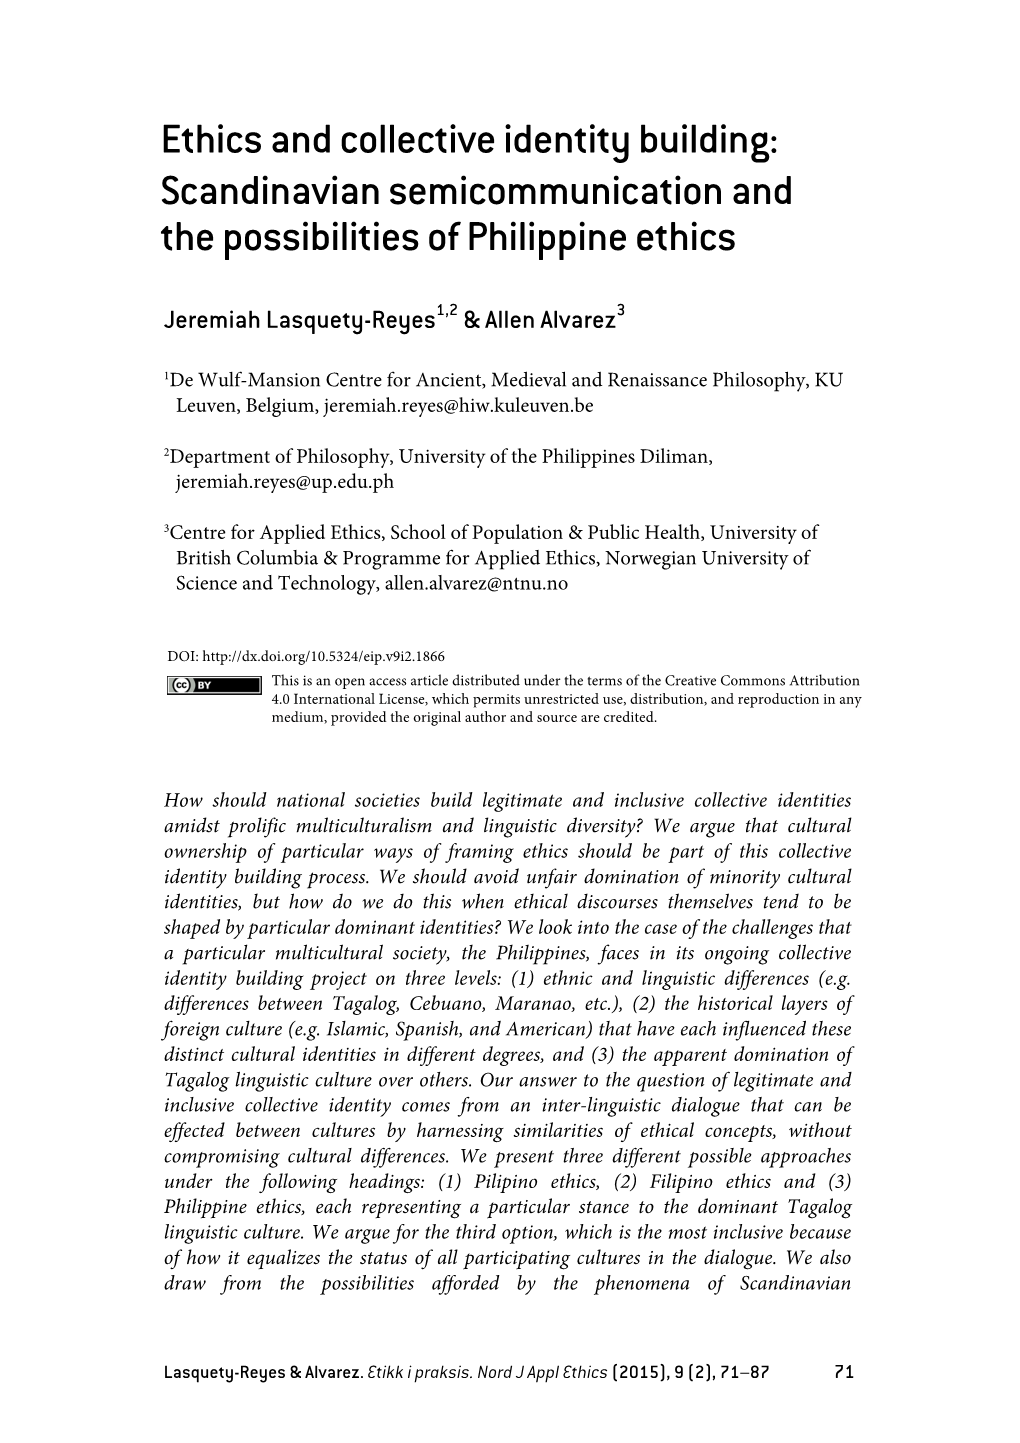 Ethics and Collective Identity Building: the Possibilities of Philippine Ethics